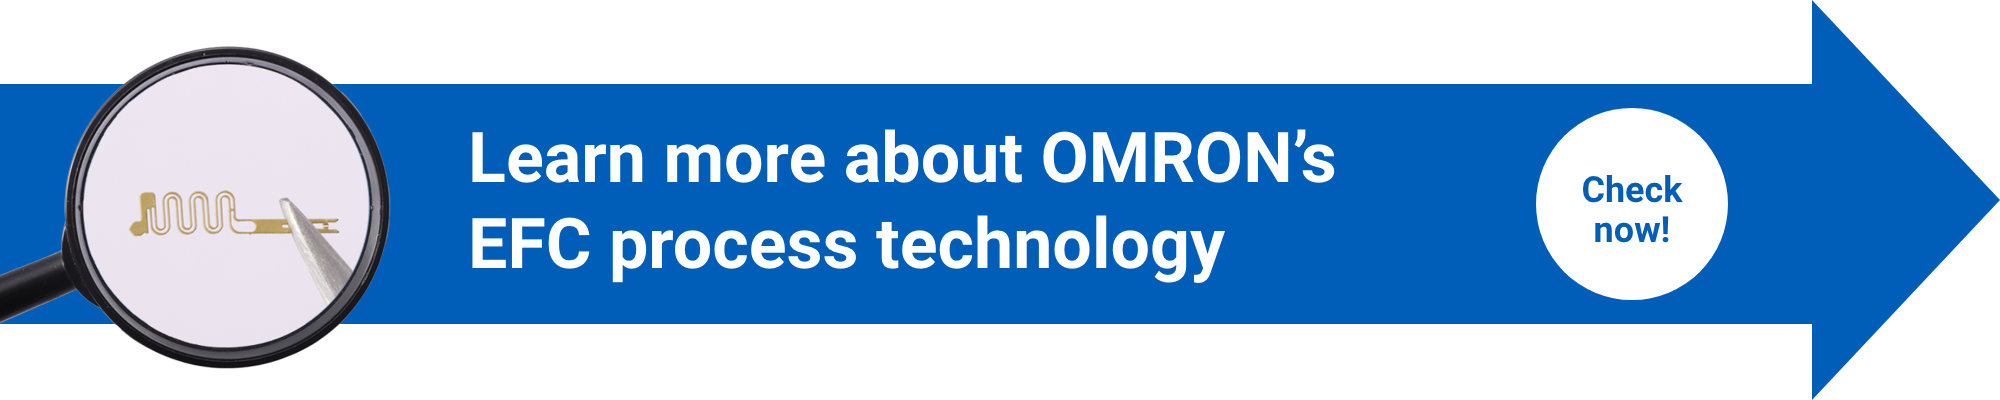 Learn more about OMRON’s EFC process technology